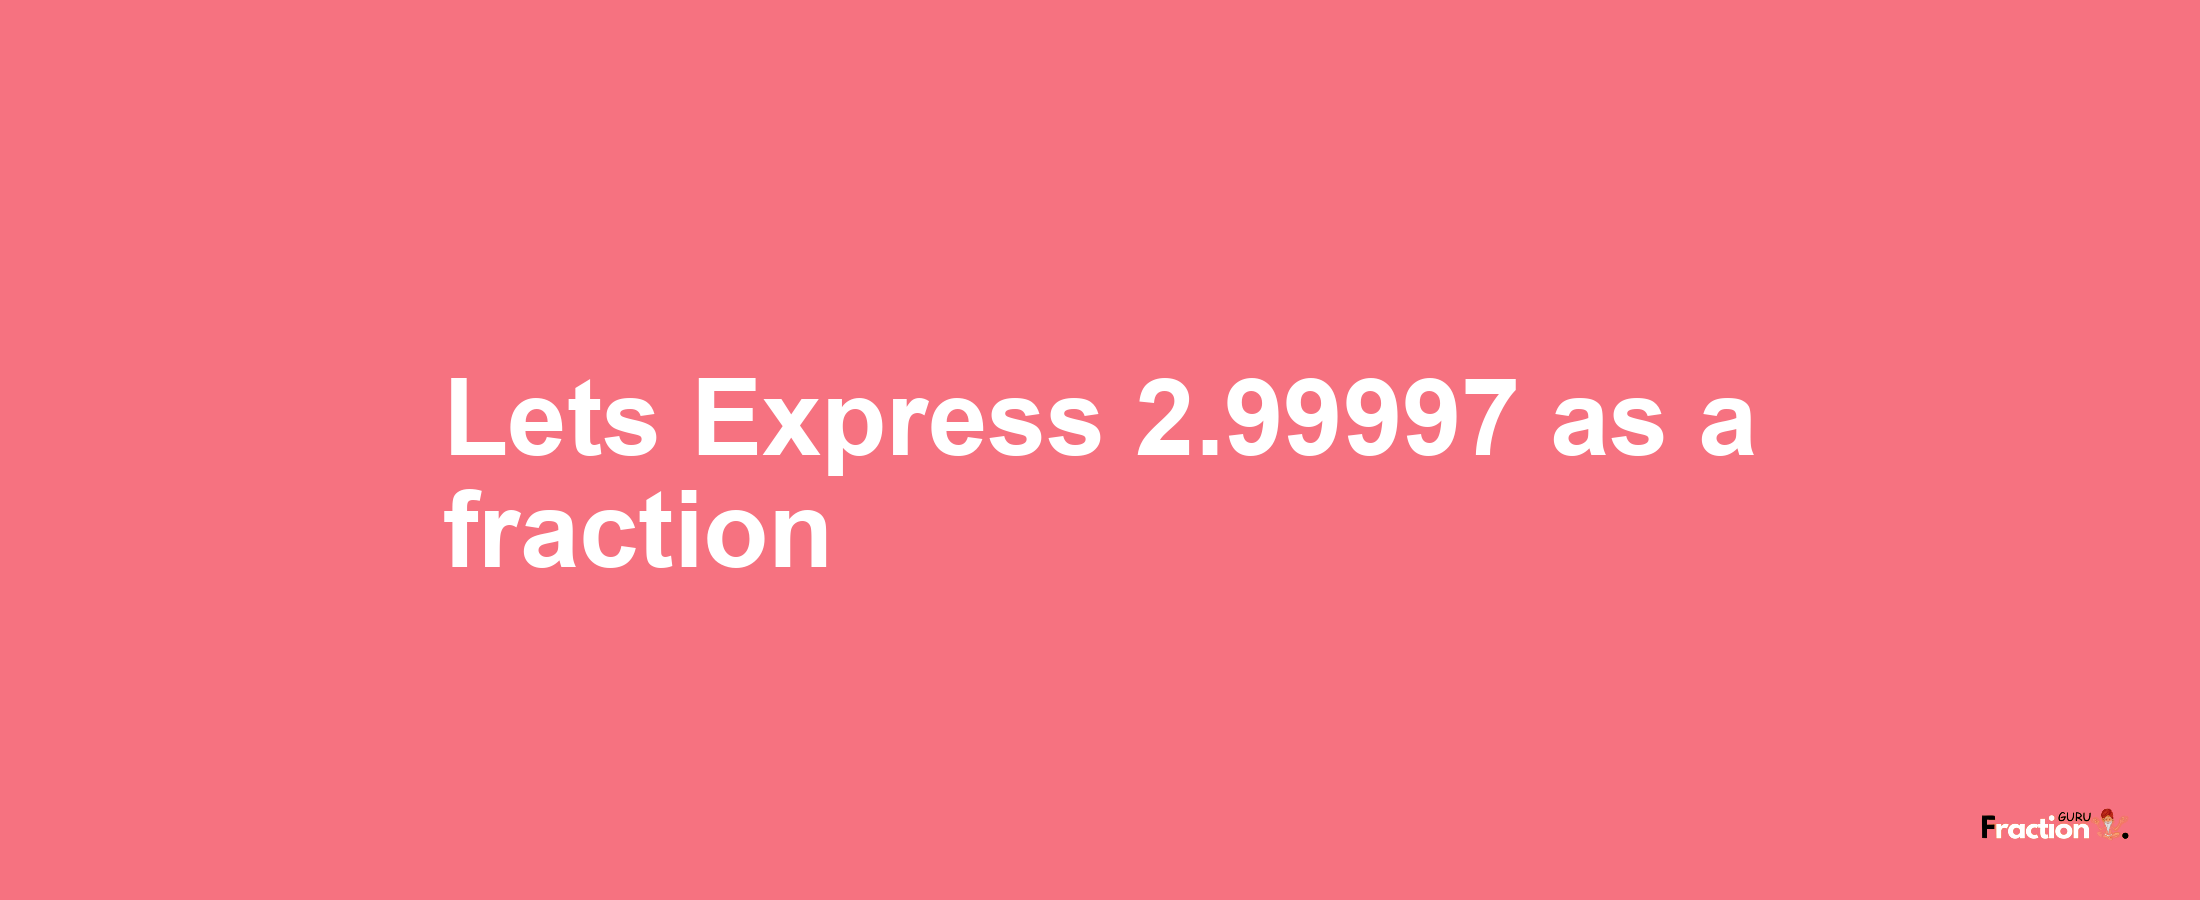 Lets Express 2.99997 as afraction